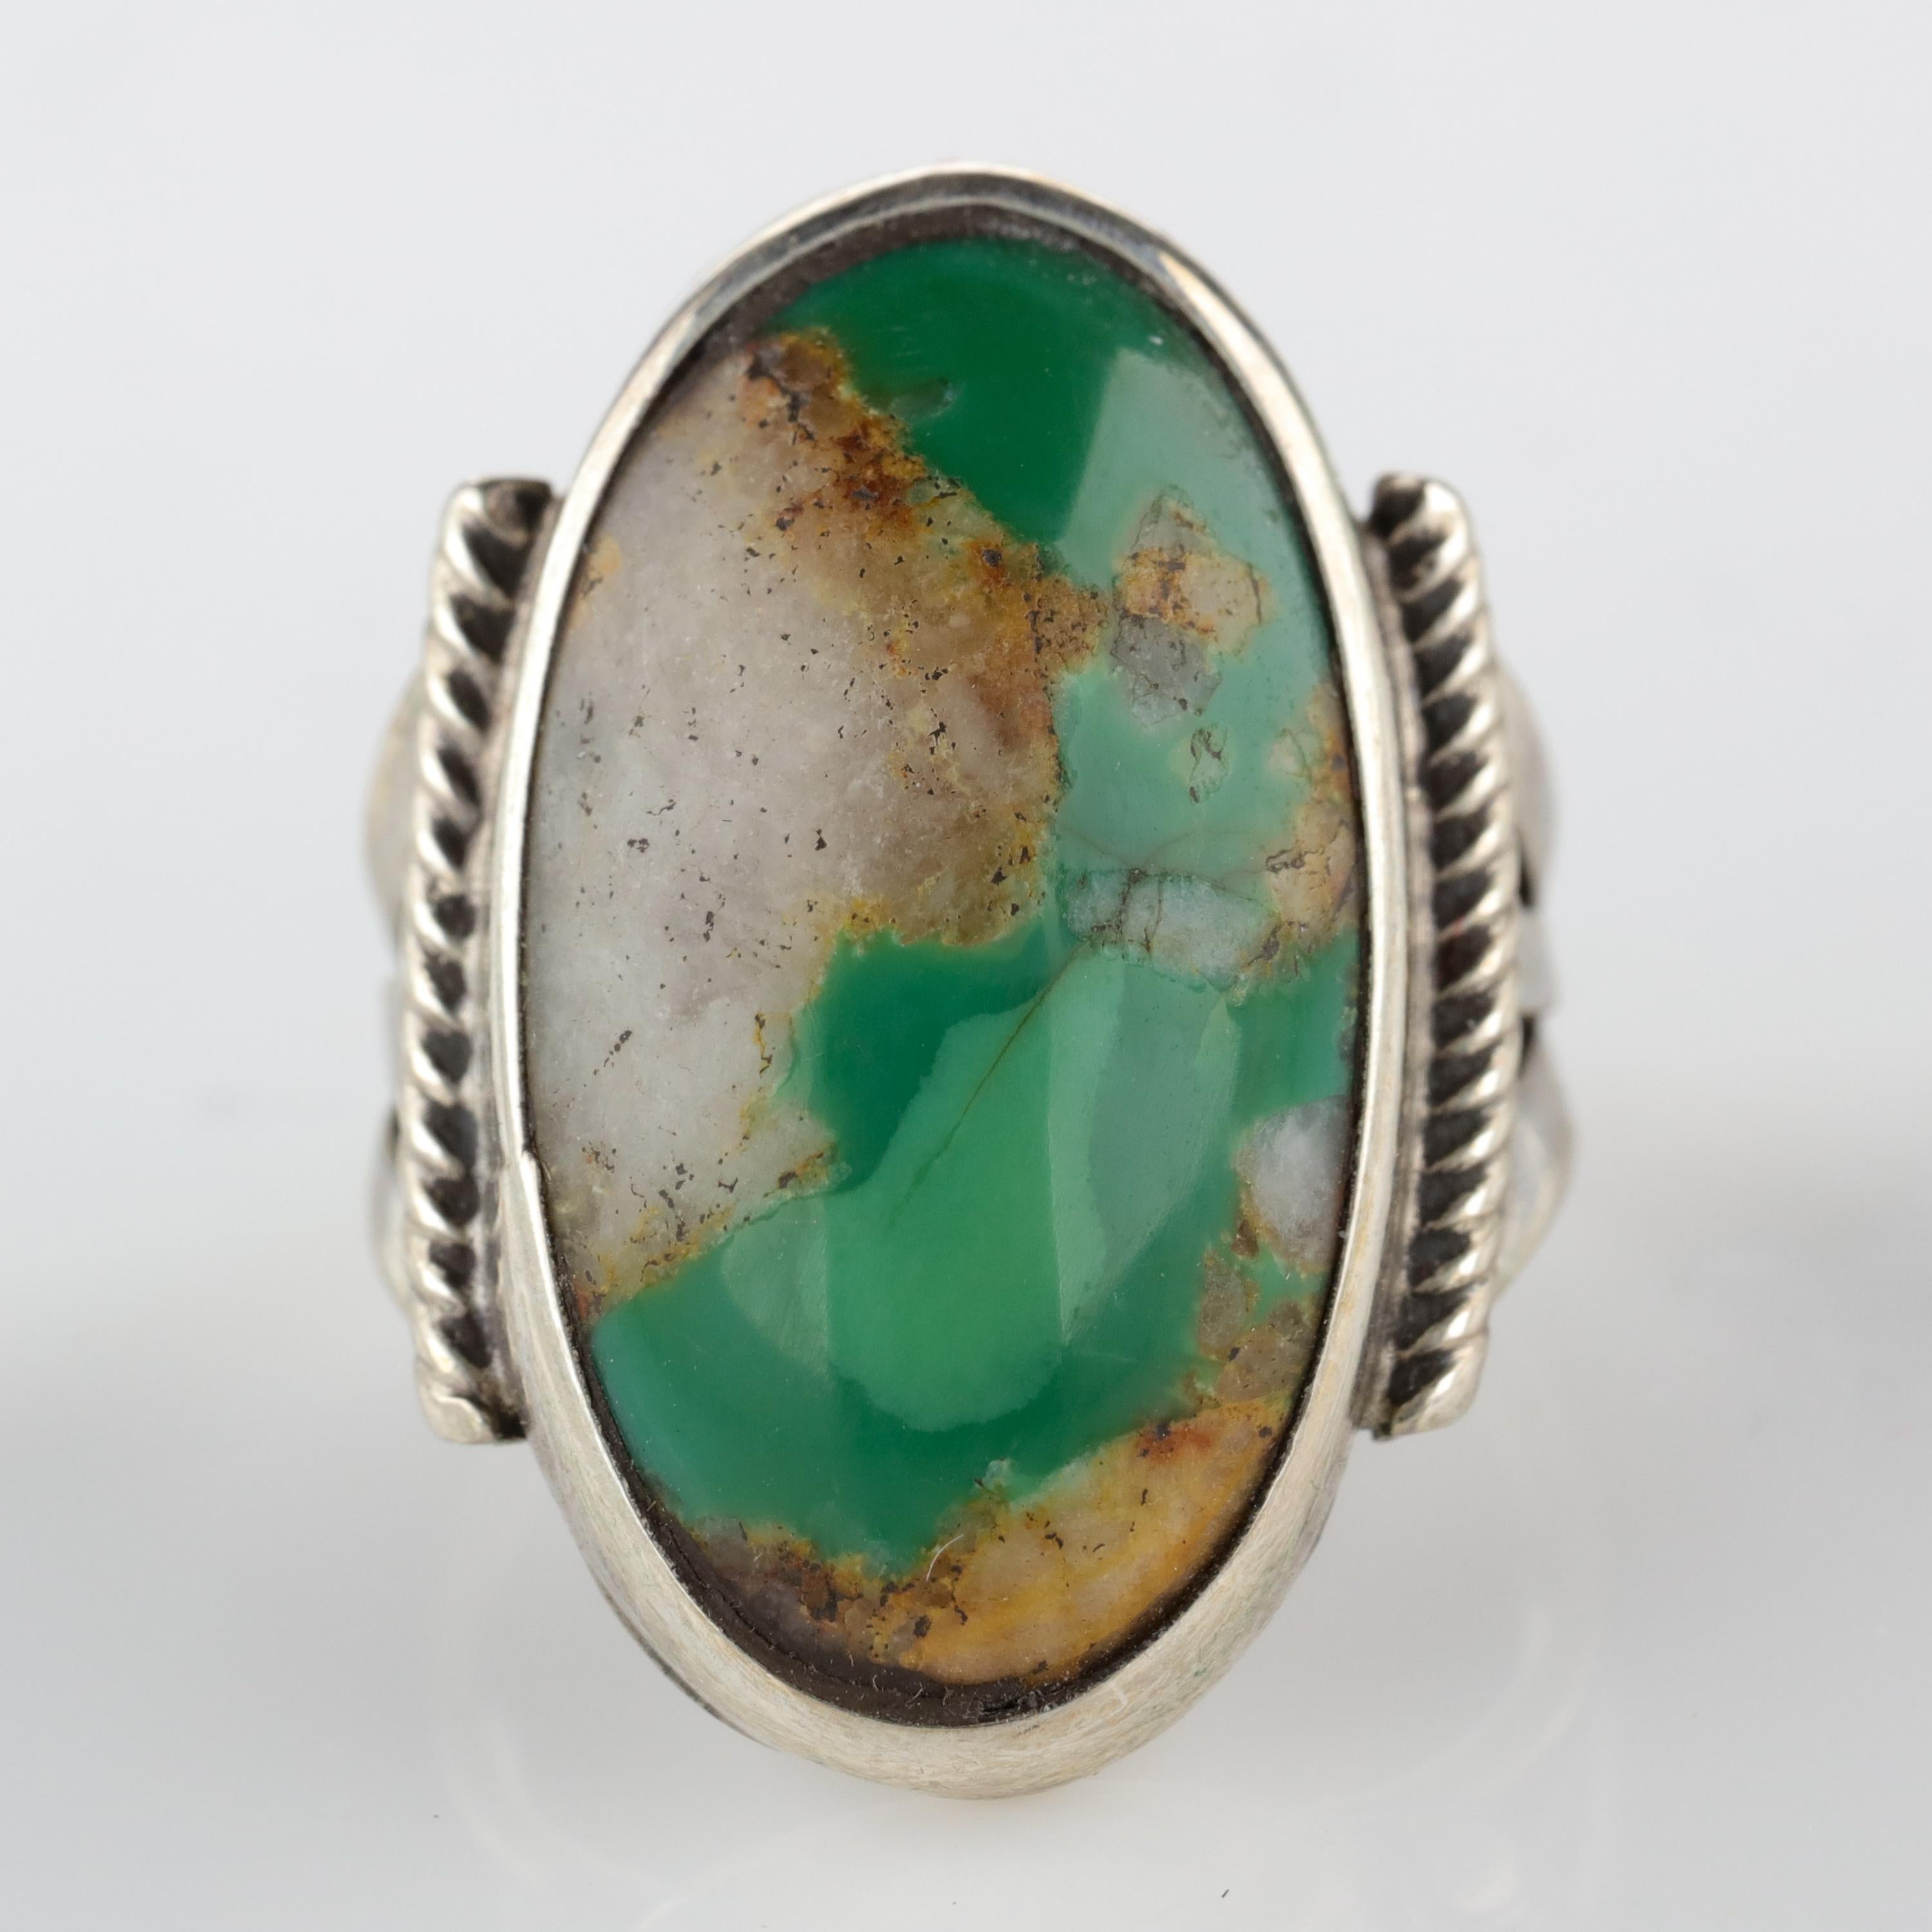 A stunning oblong cabochon of gemmy Pilot Mountain turquoise from the legendary Nevada mine is the focal point of this 1940s-era silver ring. The turquoise is especially stunning because the semi-translucent bluish-green gem is blended with quartz,